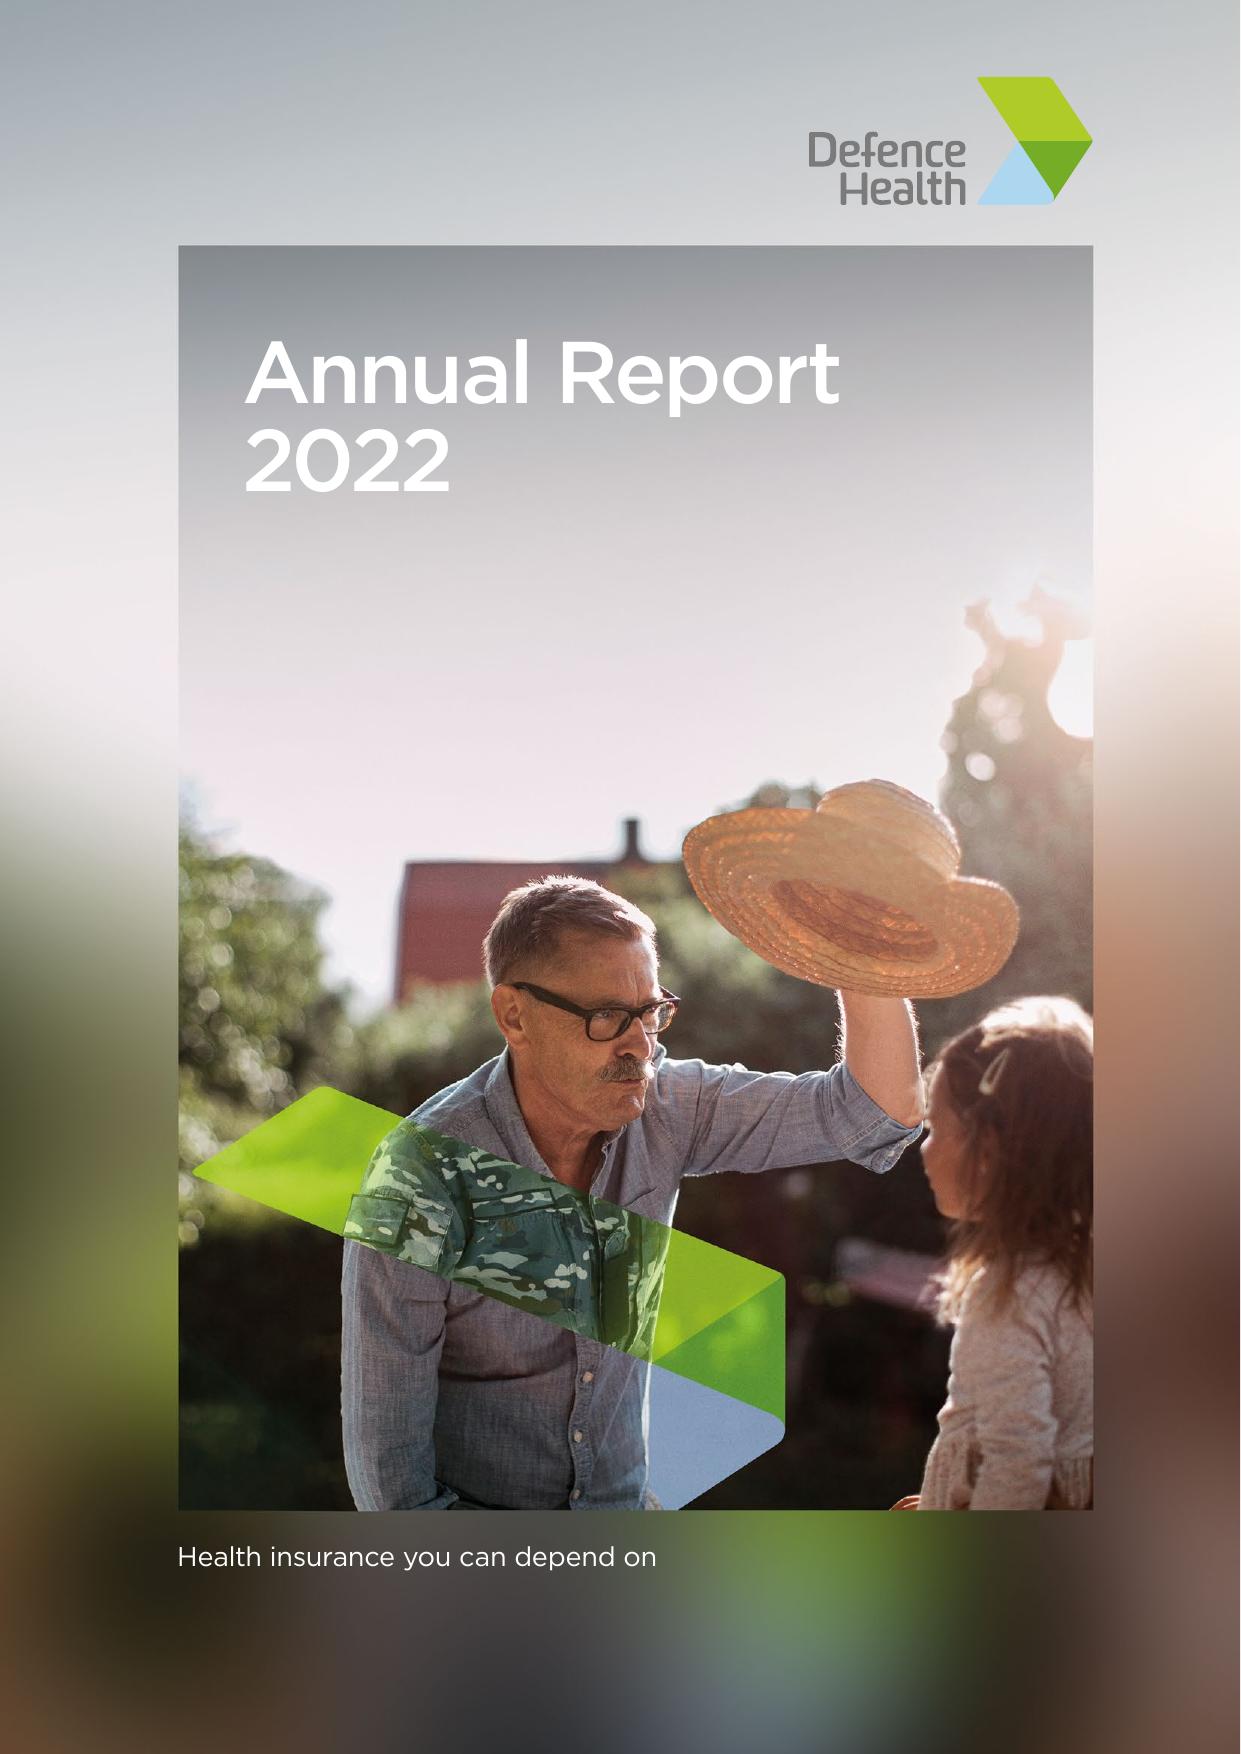 DEFENCEHEALTH 2022 Annual Report